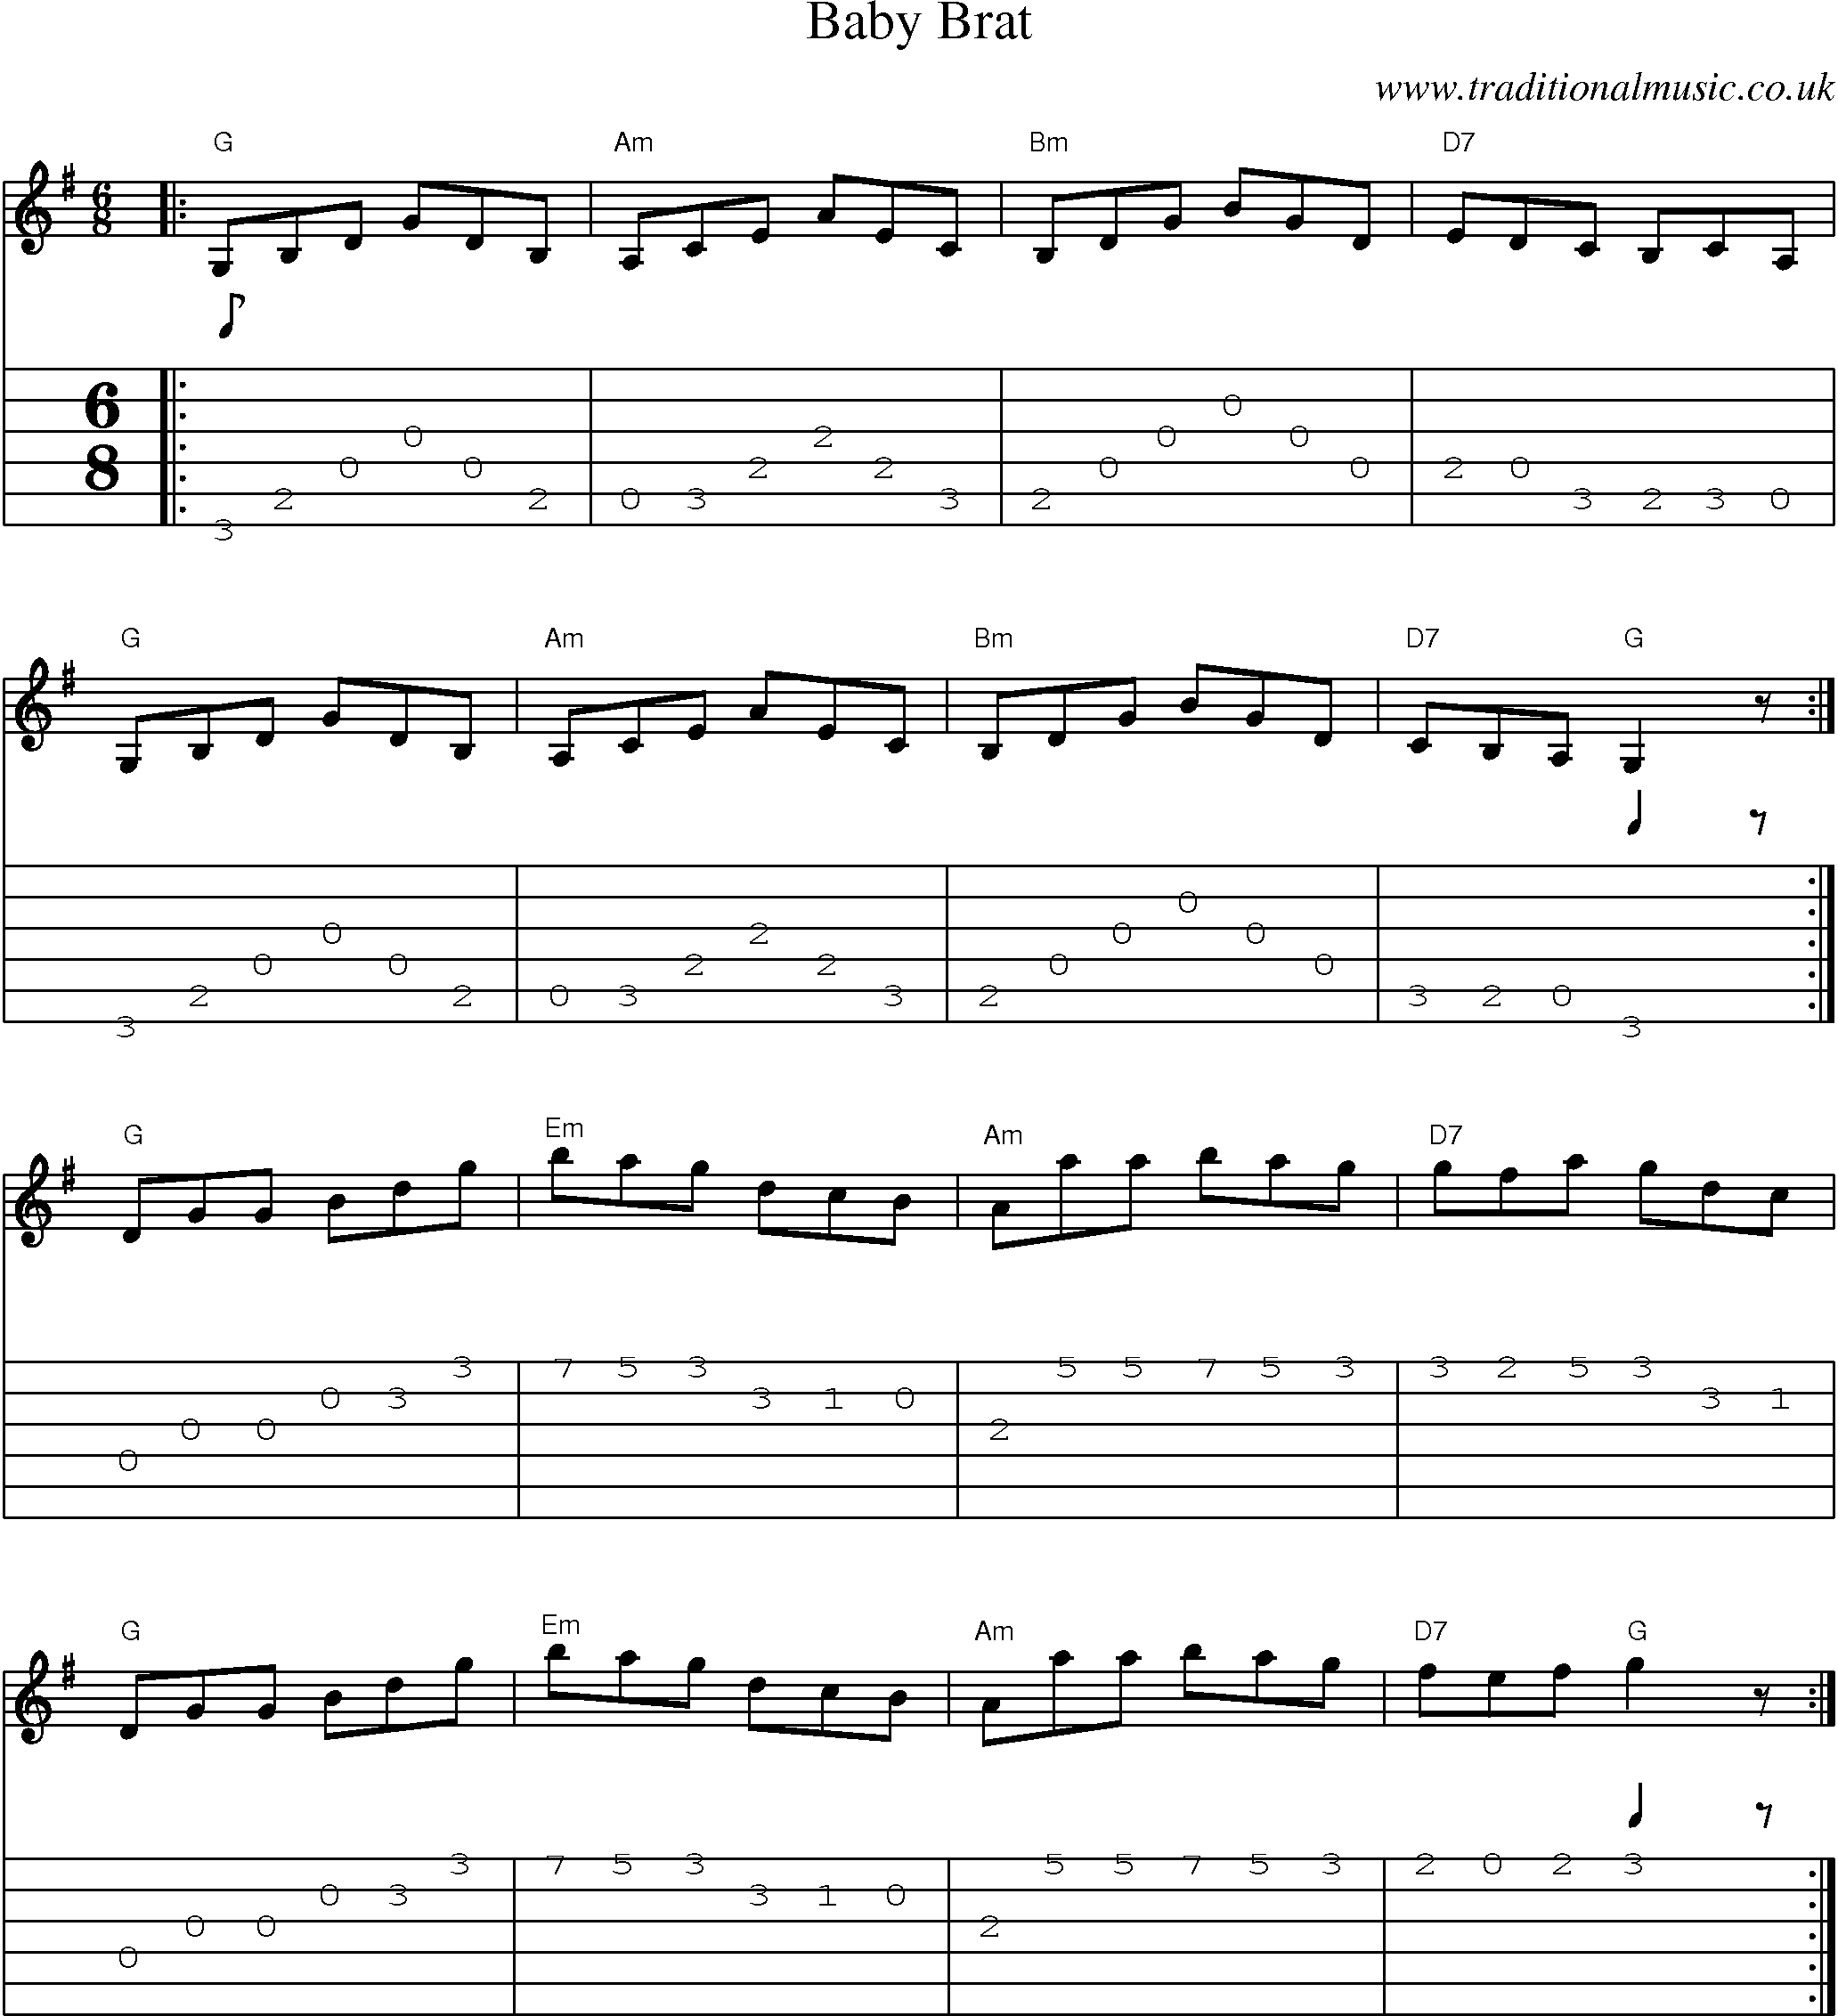 Music Score and Guitar Tabs for Baby Brat